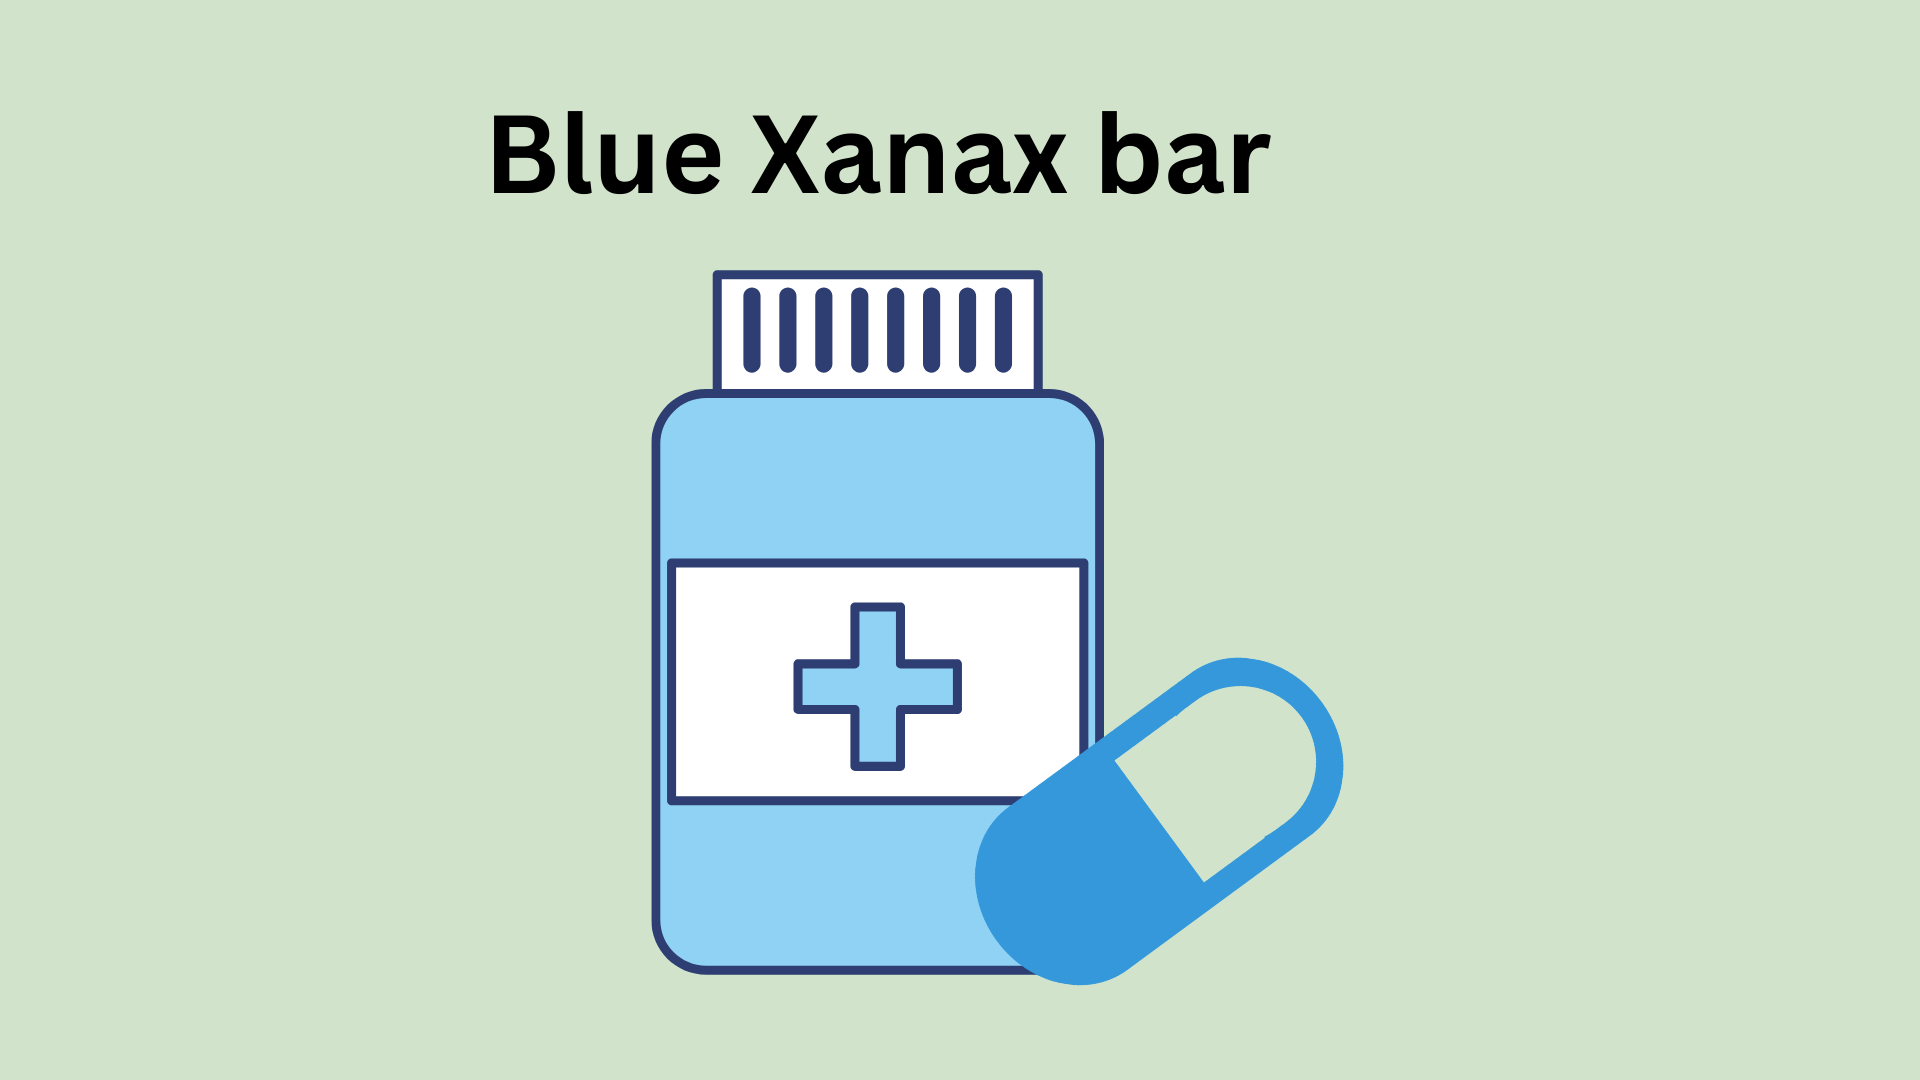 Everything about Blue Xanax bar 12